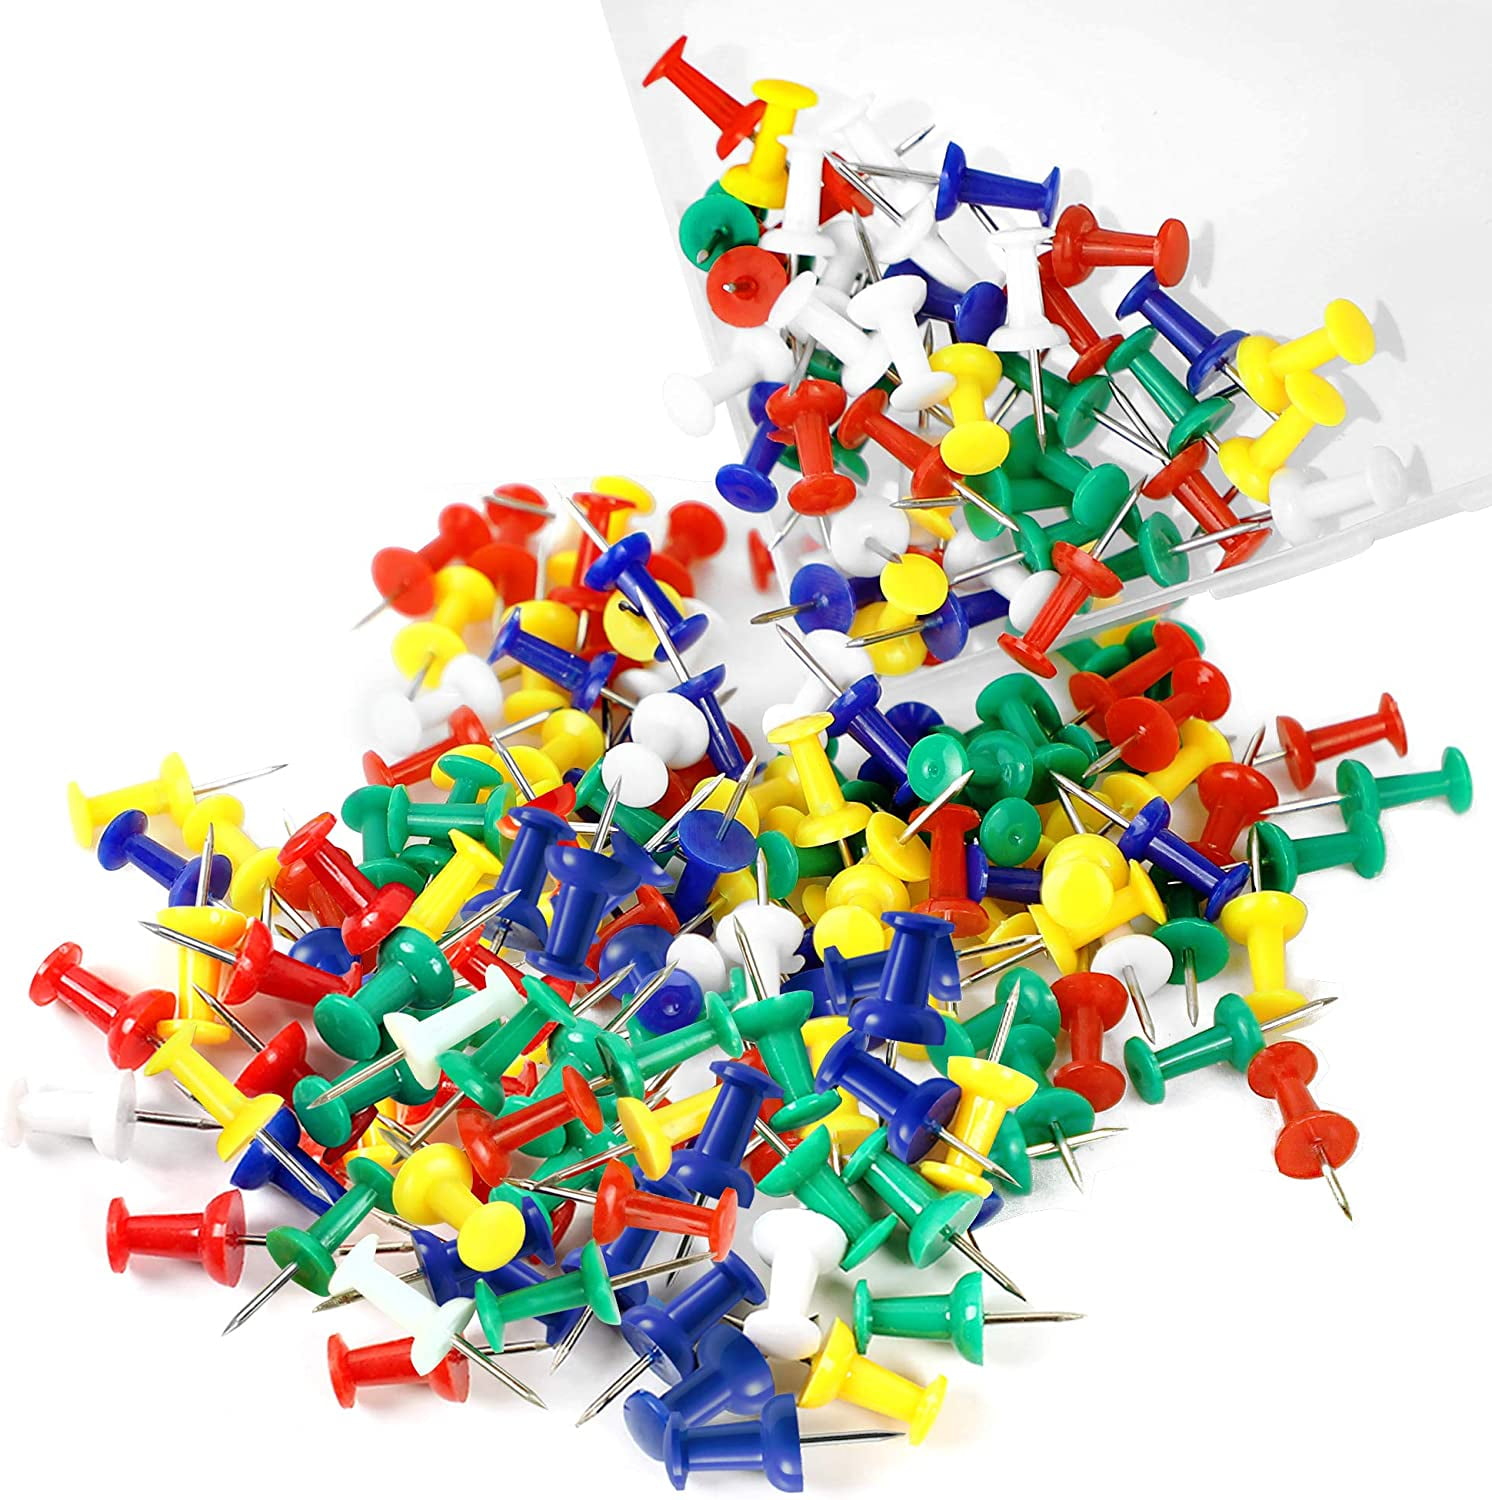 Push Pins Pack of 50